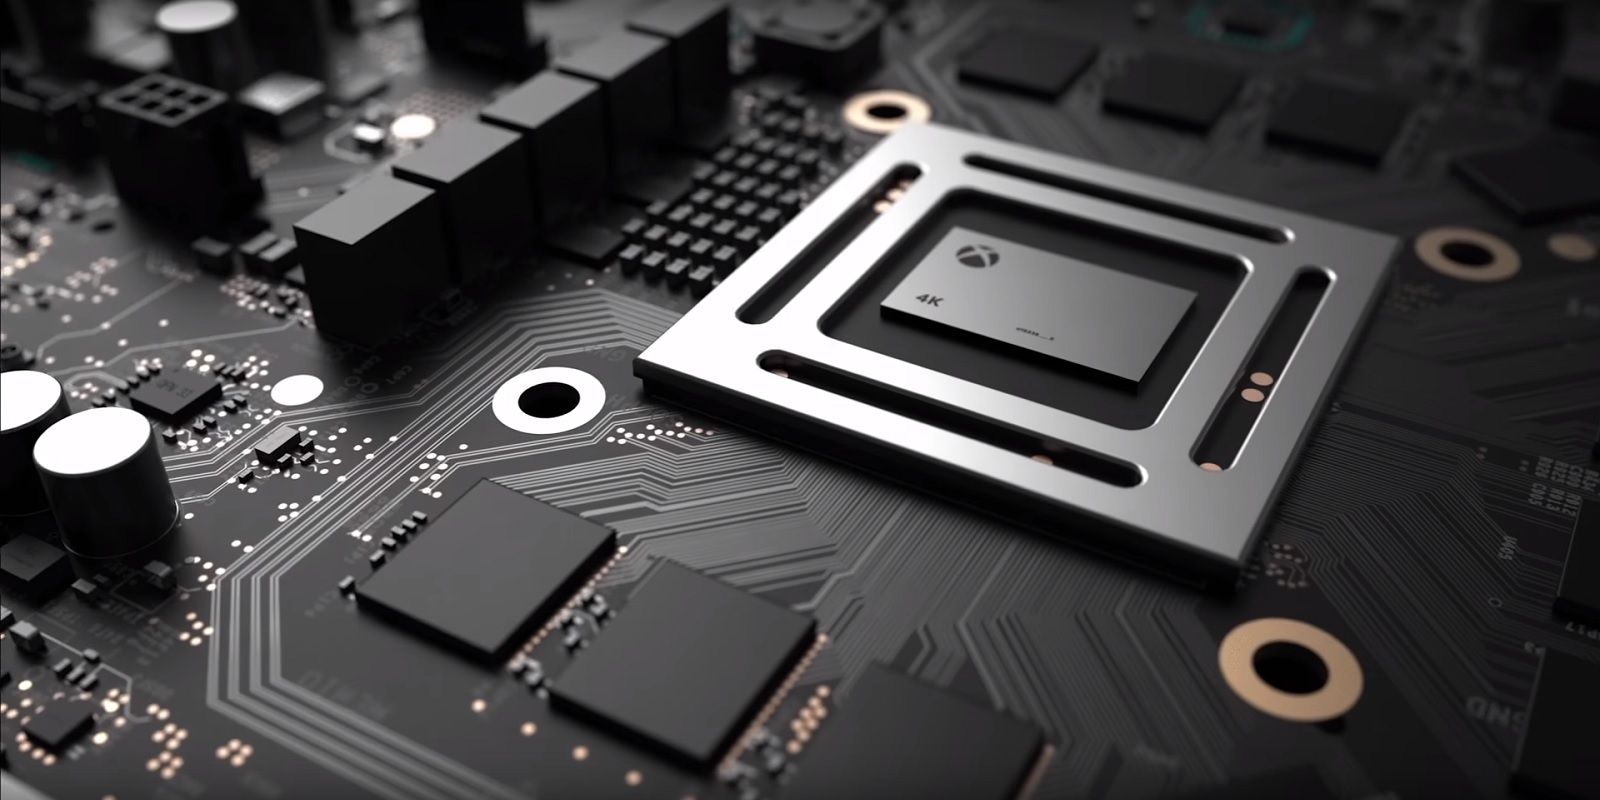 Project Scorpio could include internal PSU and 4K Game DVR capture (rumor)